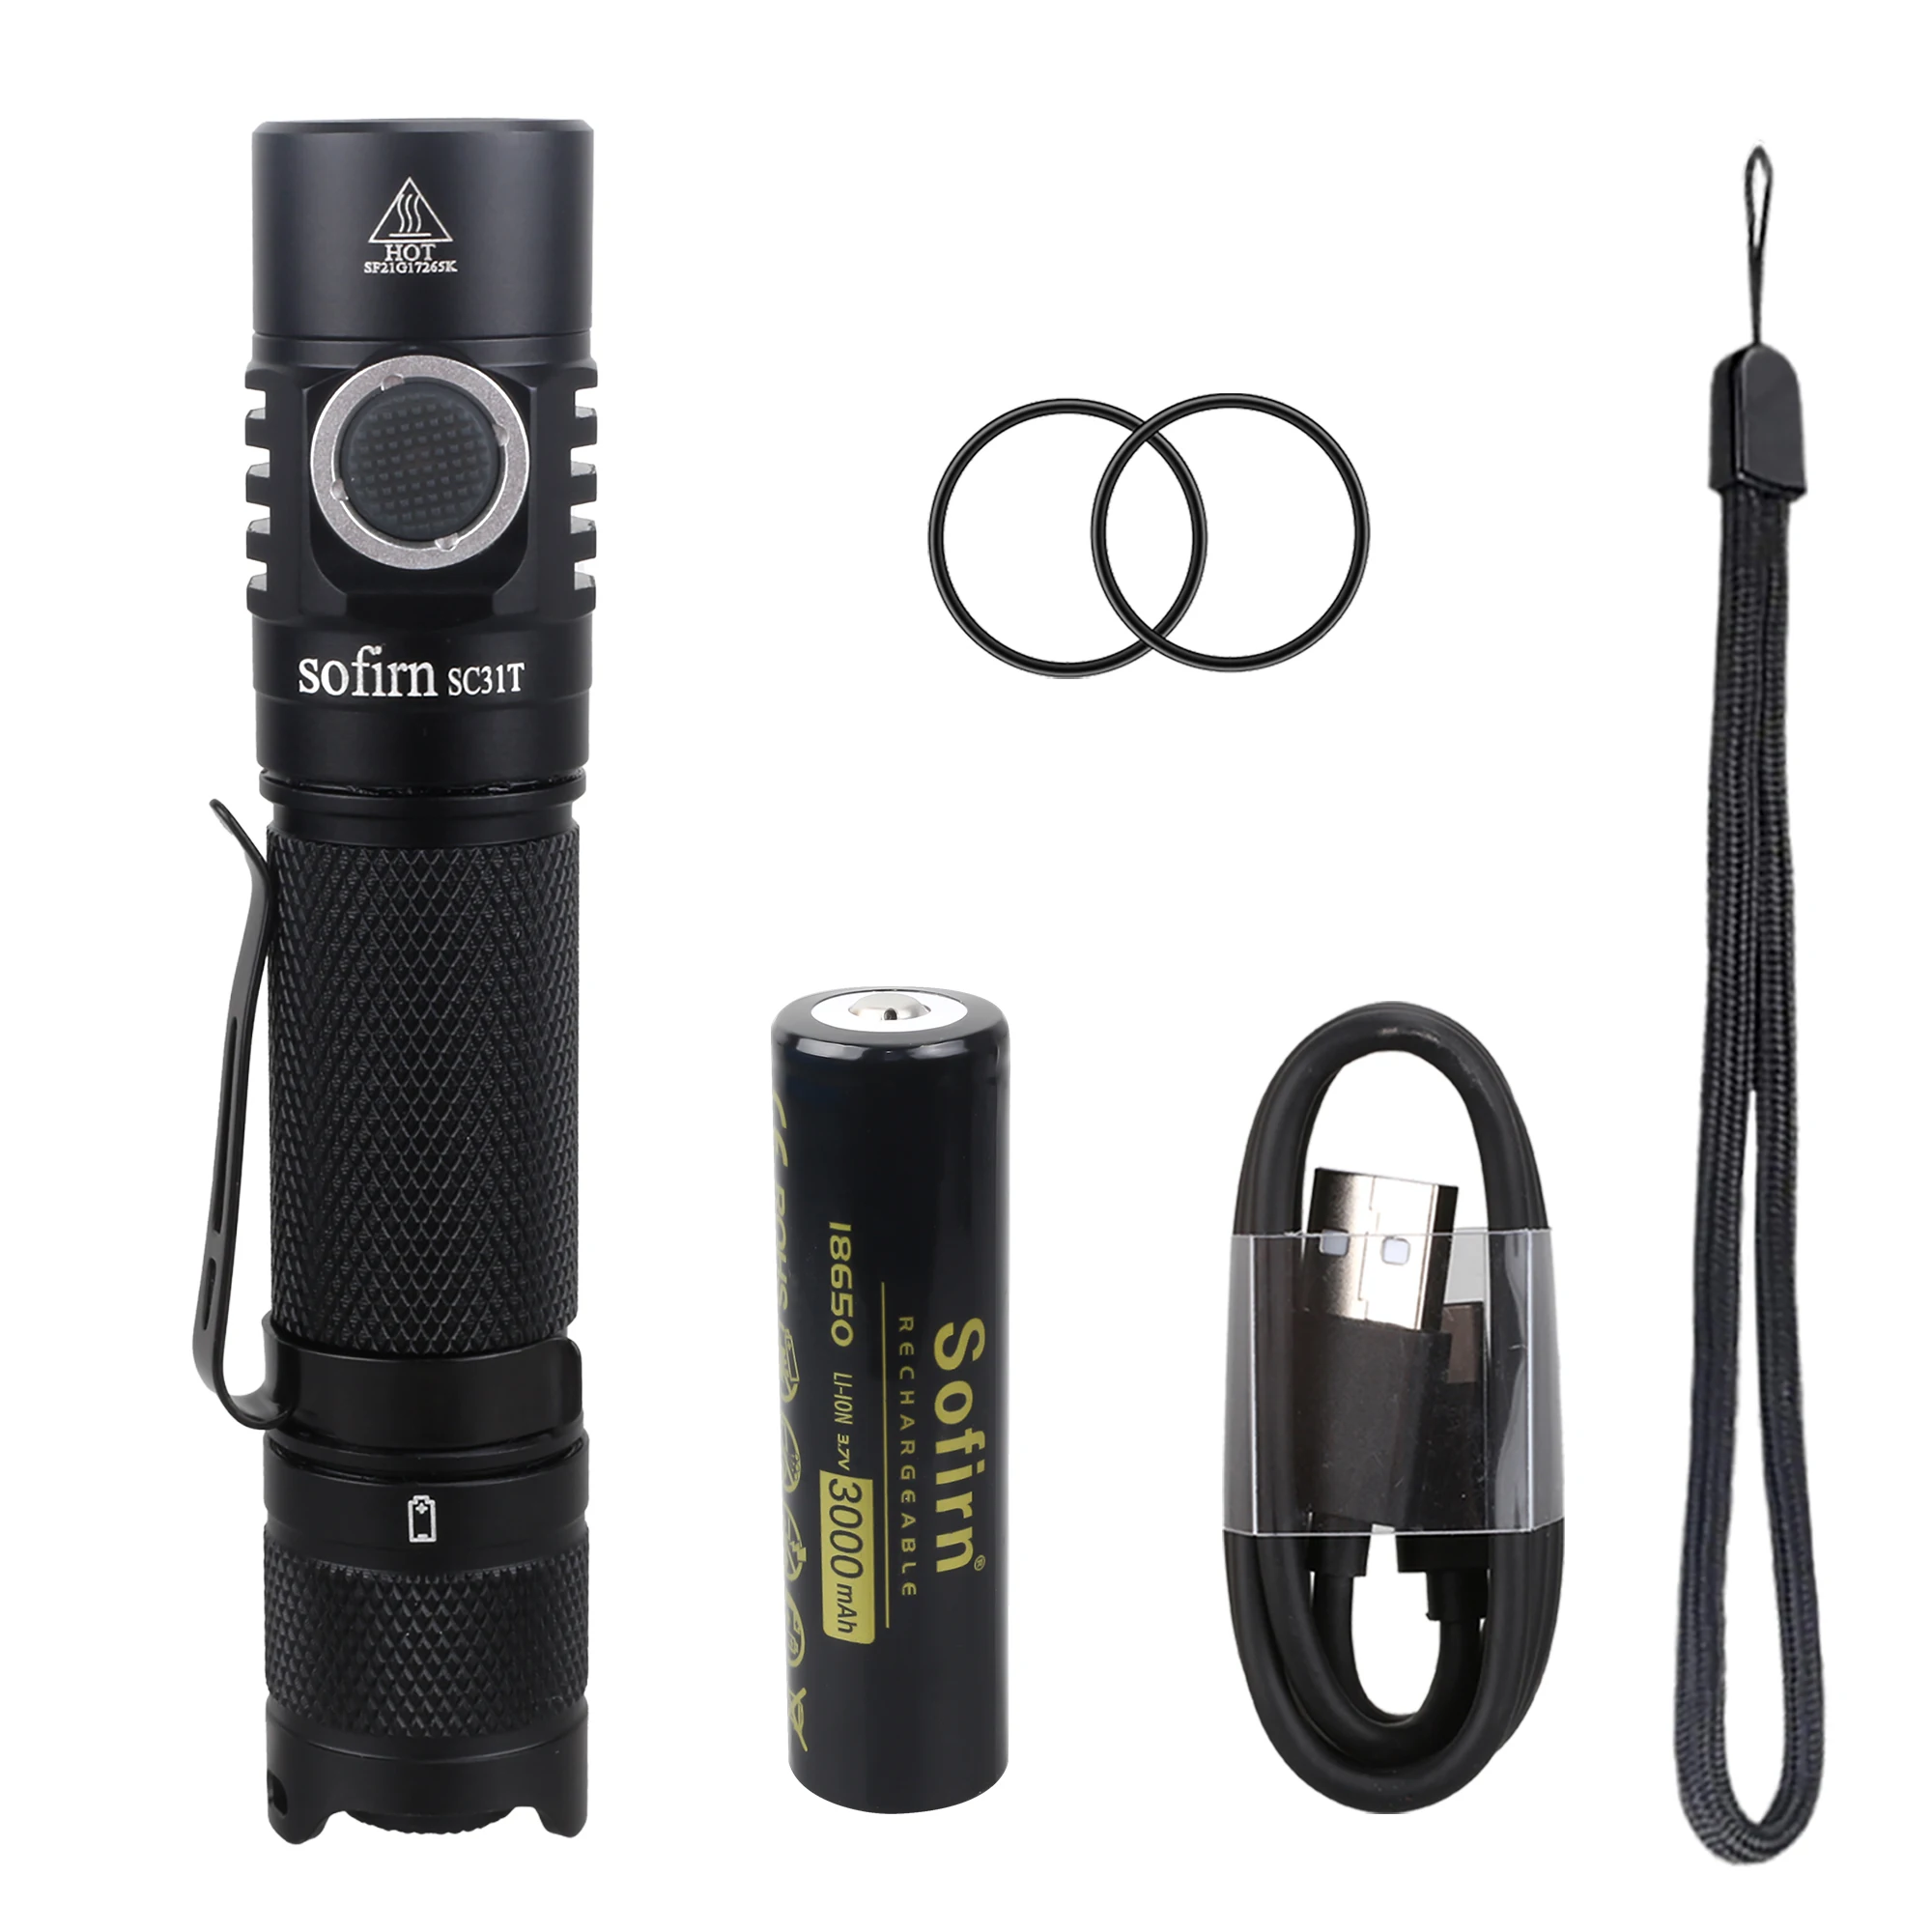 Sofirn SC31T review, Multi-purpose light with 2,000 lumens